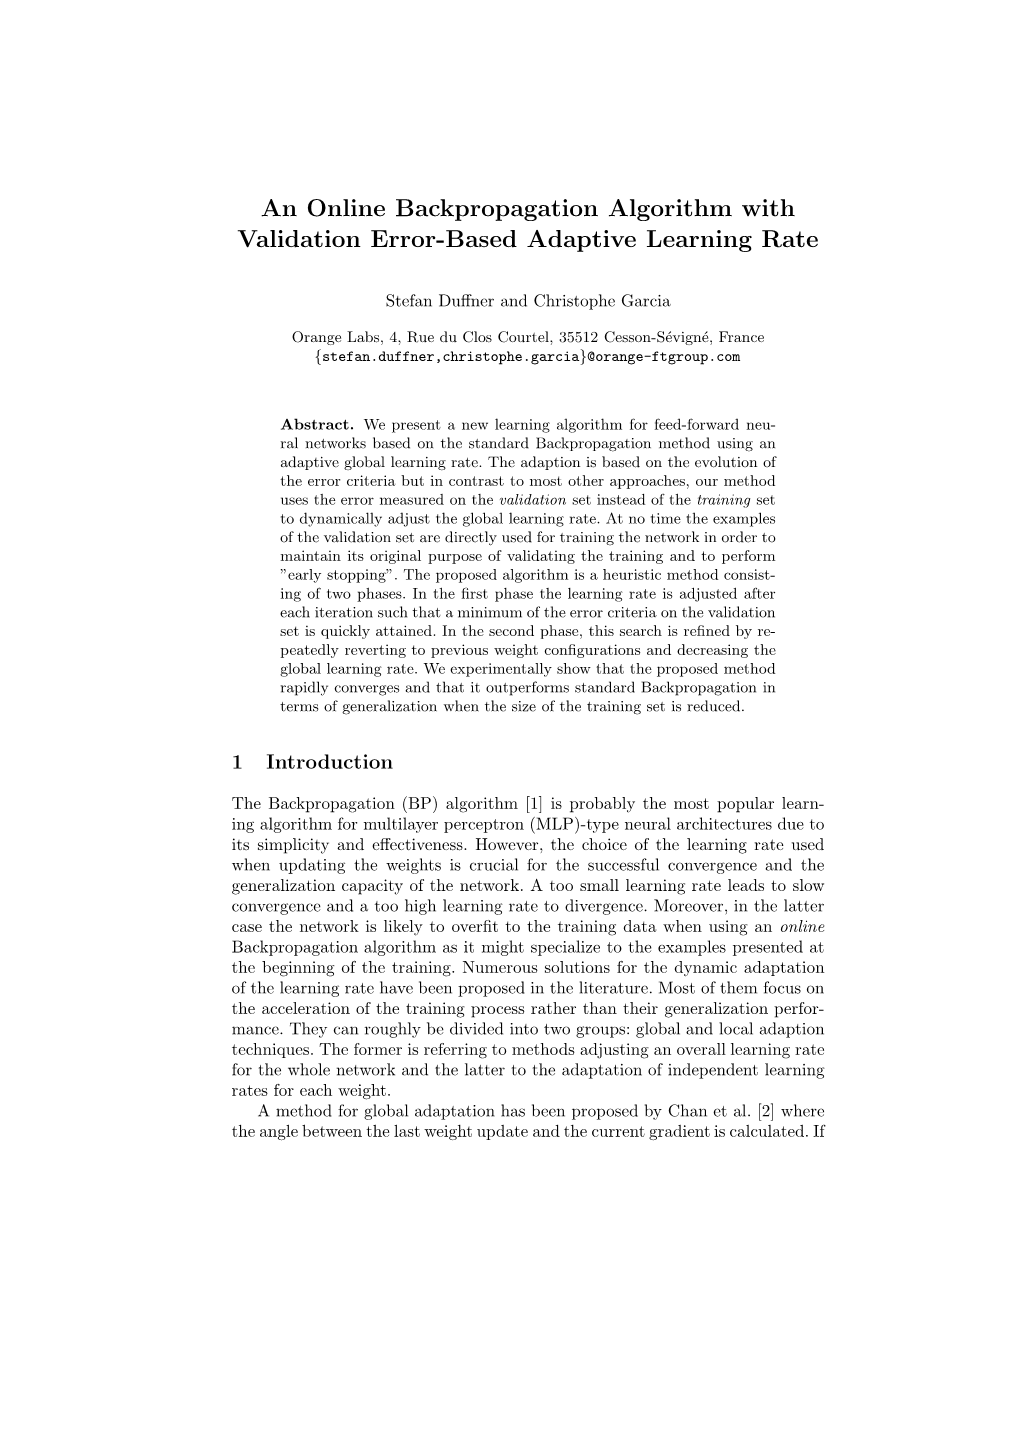 An Online Backpropagation Algorithm with Validation Error-Based Adaptive Learning Rate